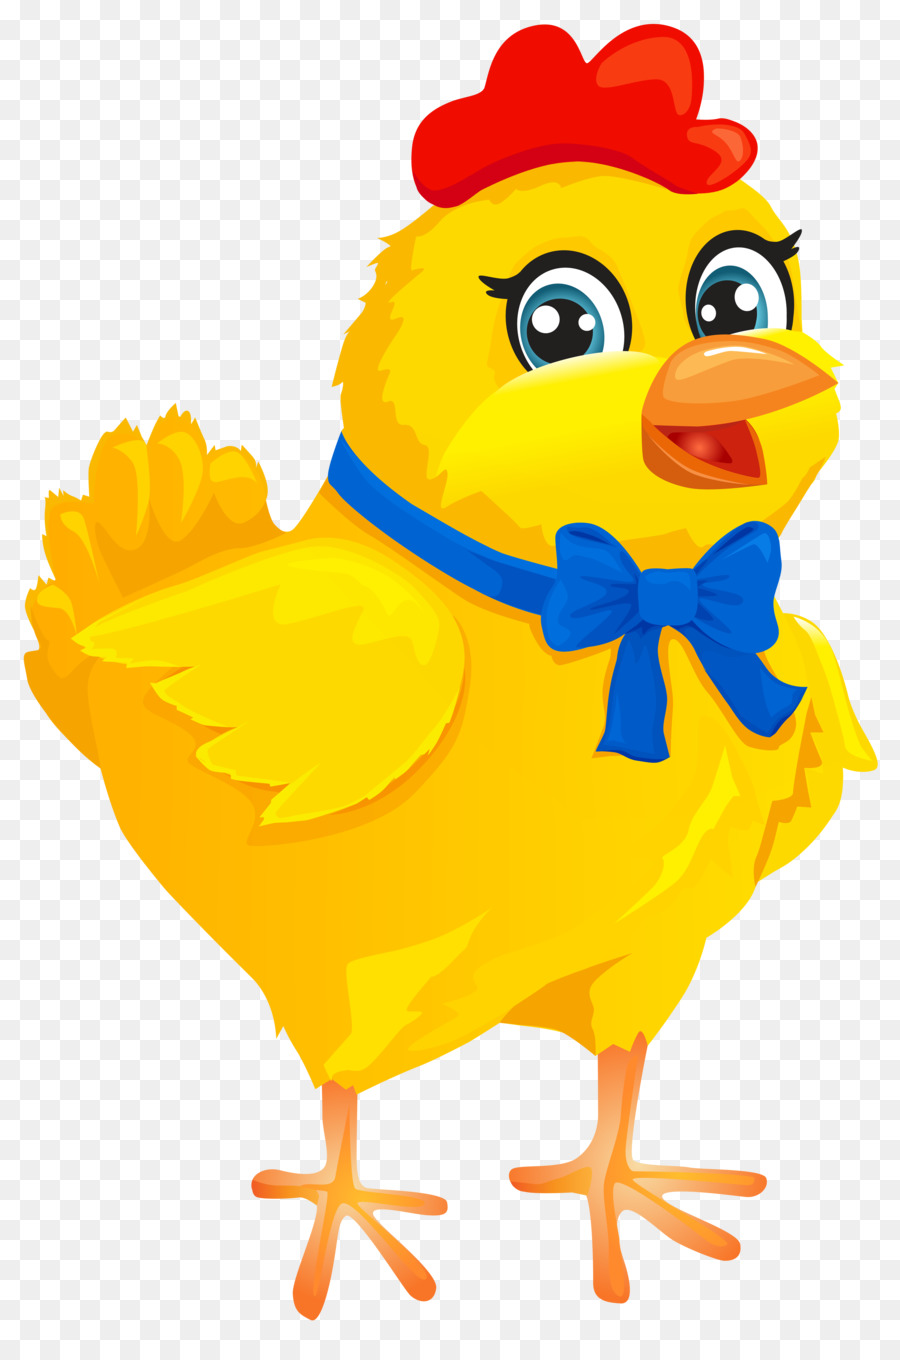 Chicken Easter Kifaranga Clip art - chick png download - 5348*8000 - Free Transparent Chicken png Download.